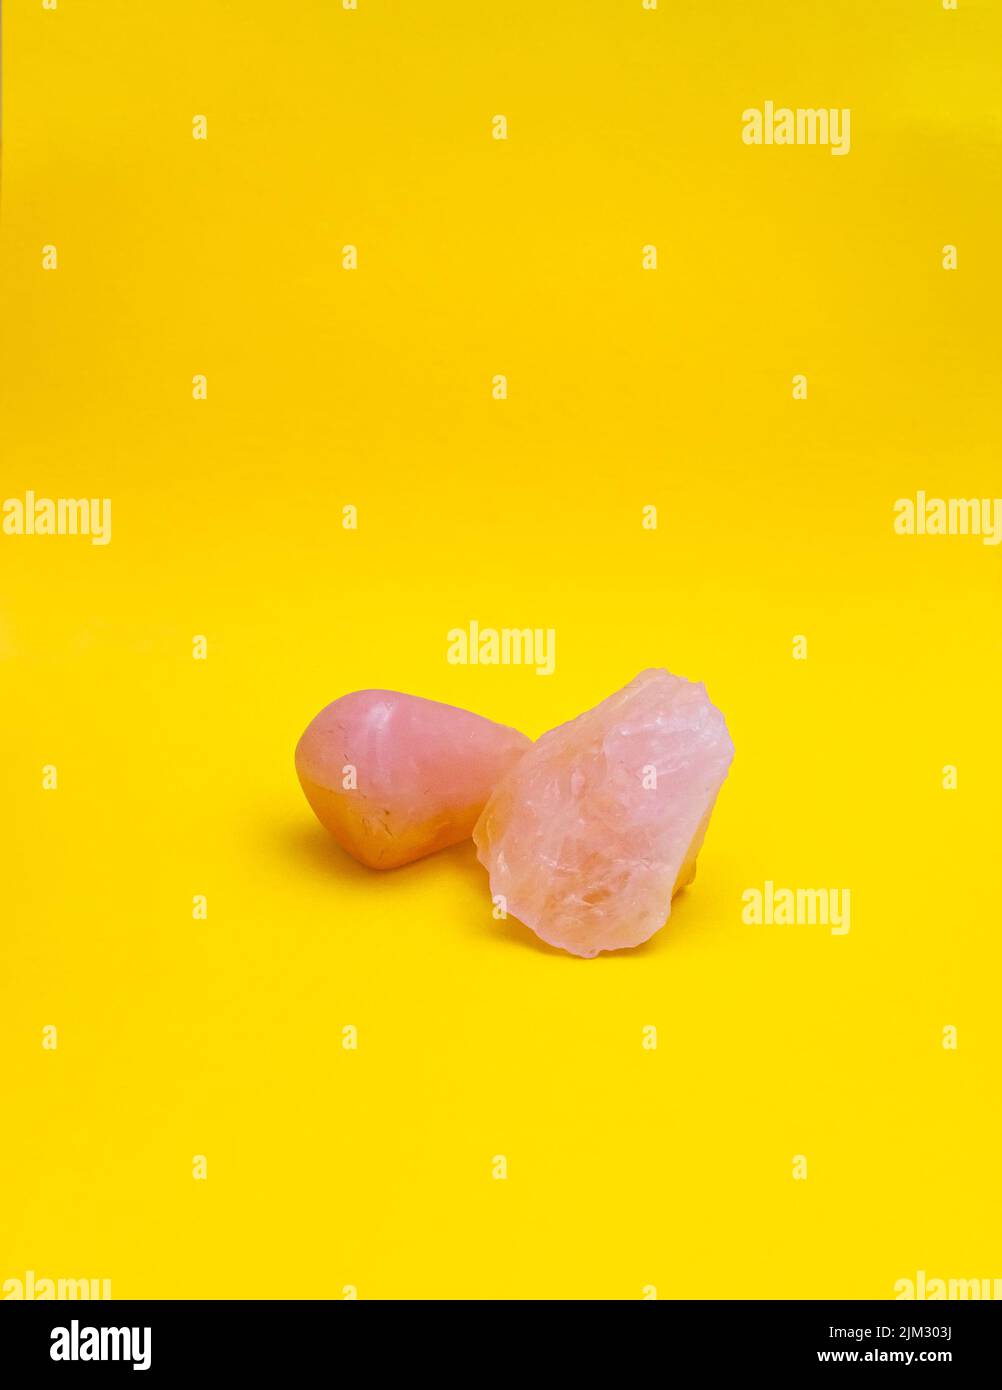 Polished rose quartz and rough/raw rose quartz crystals on a plain, bright yellow background with copy space. Stock Photo